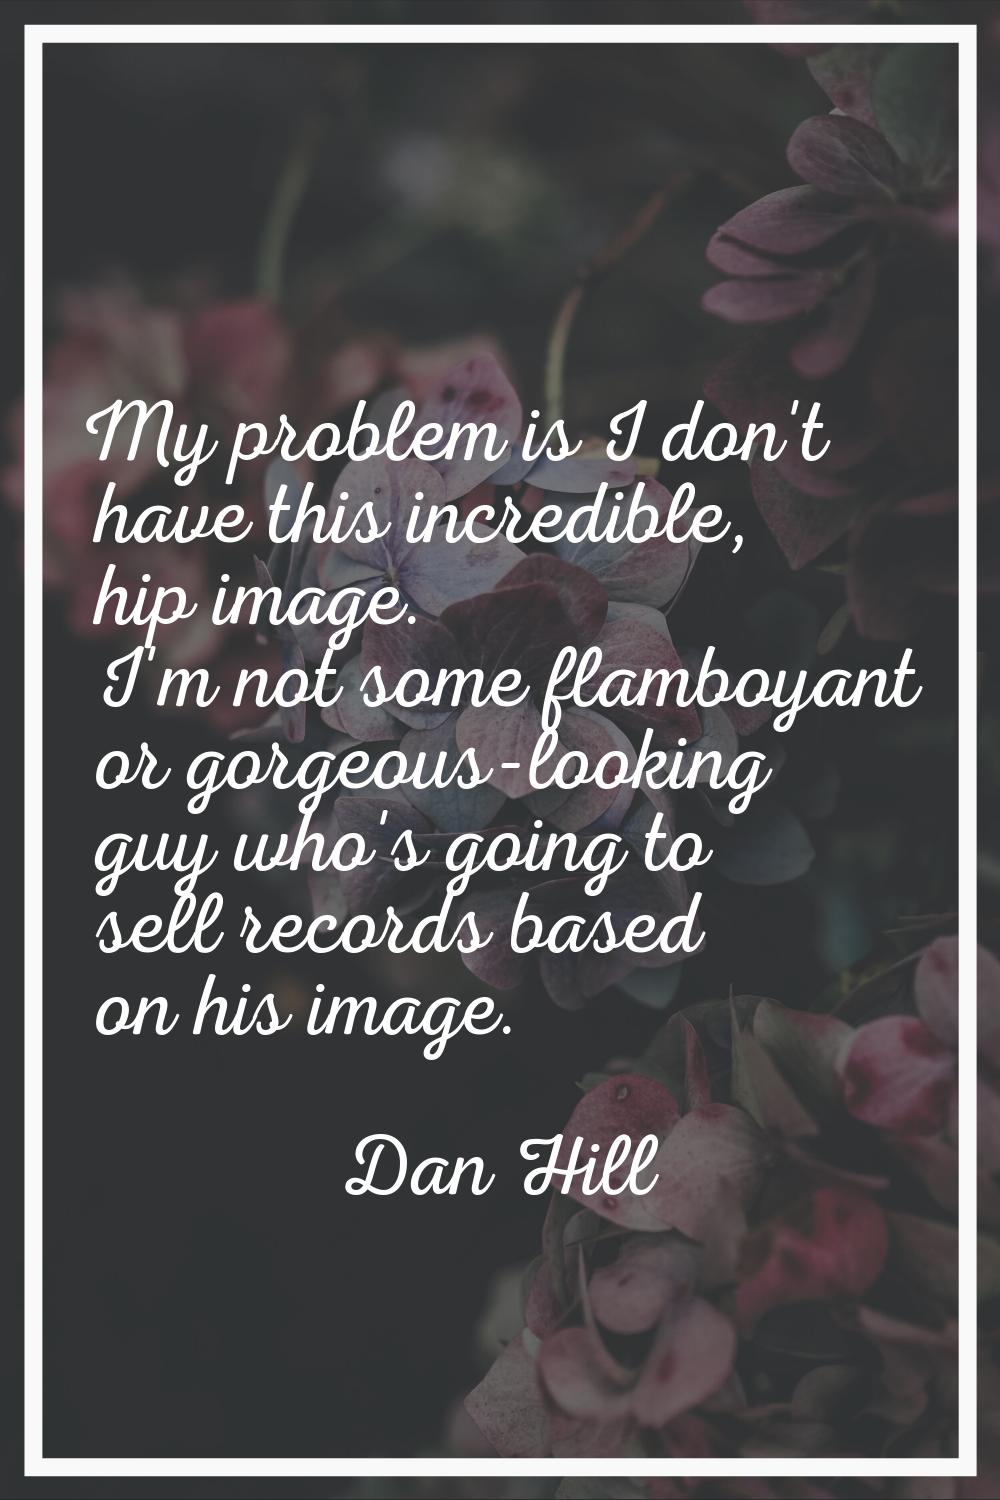 My problem is I don't have this incredible, hip image. I'm not some flamboyant or gorgeous-looking 